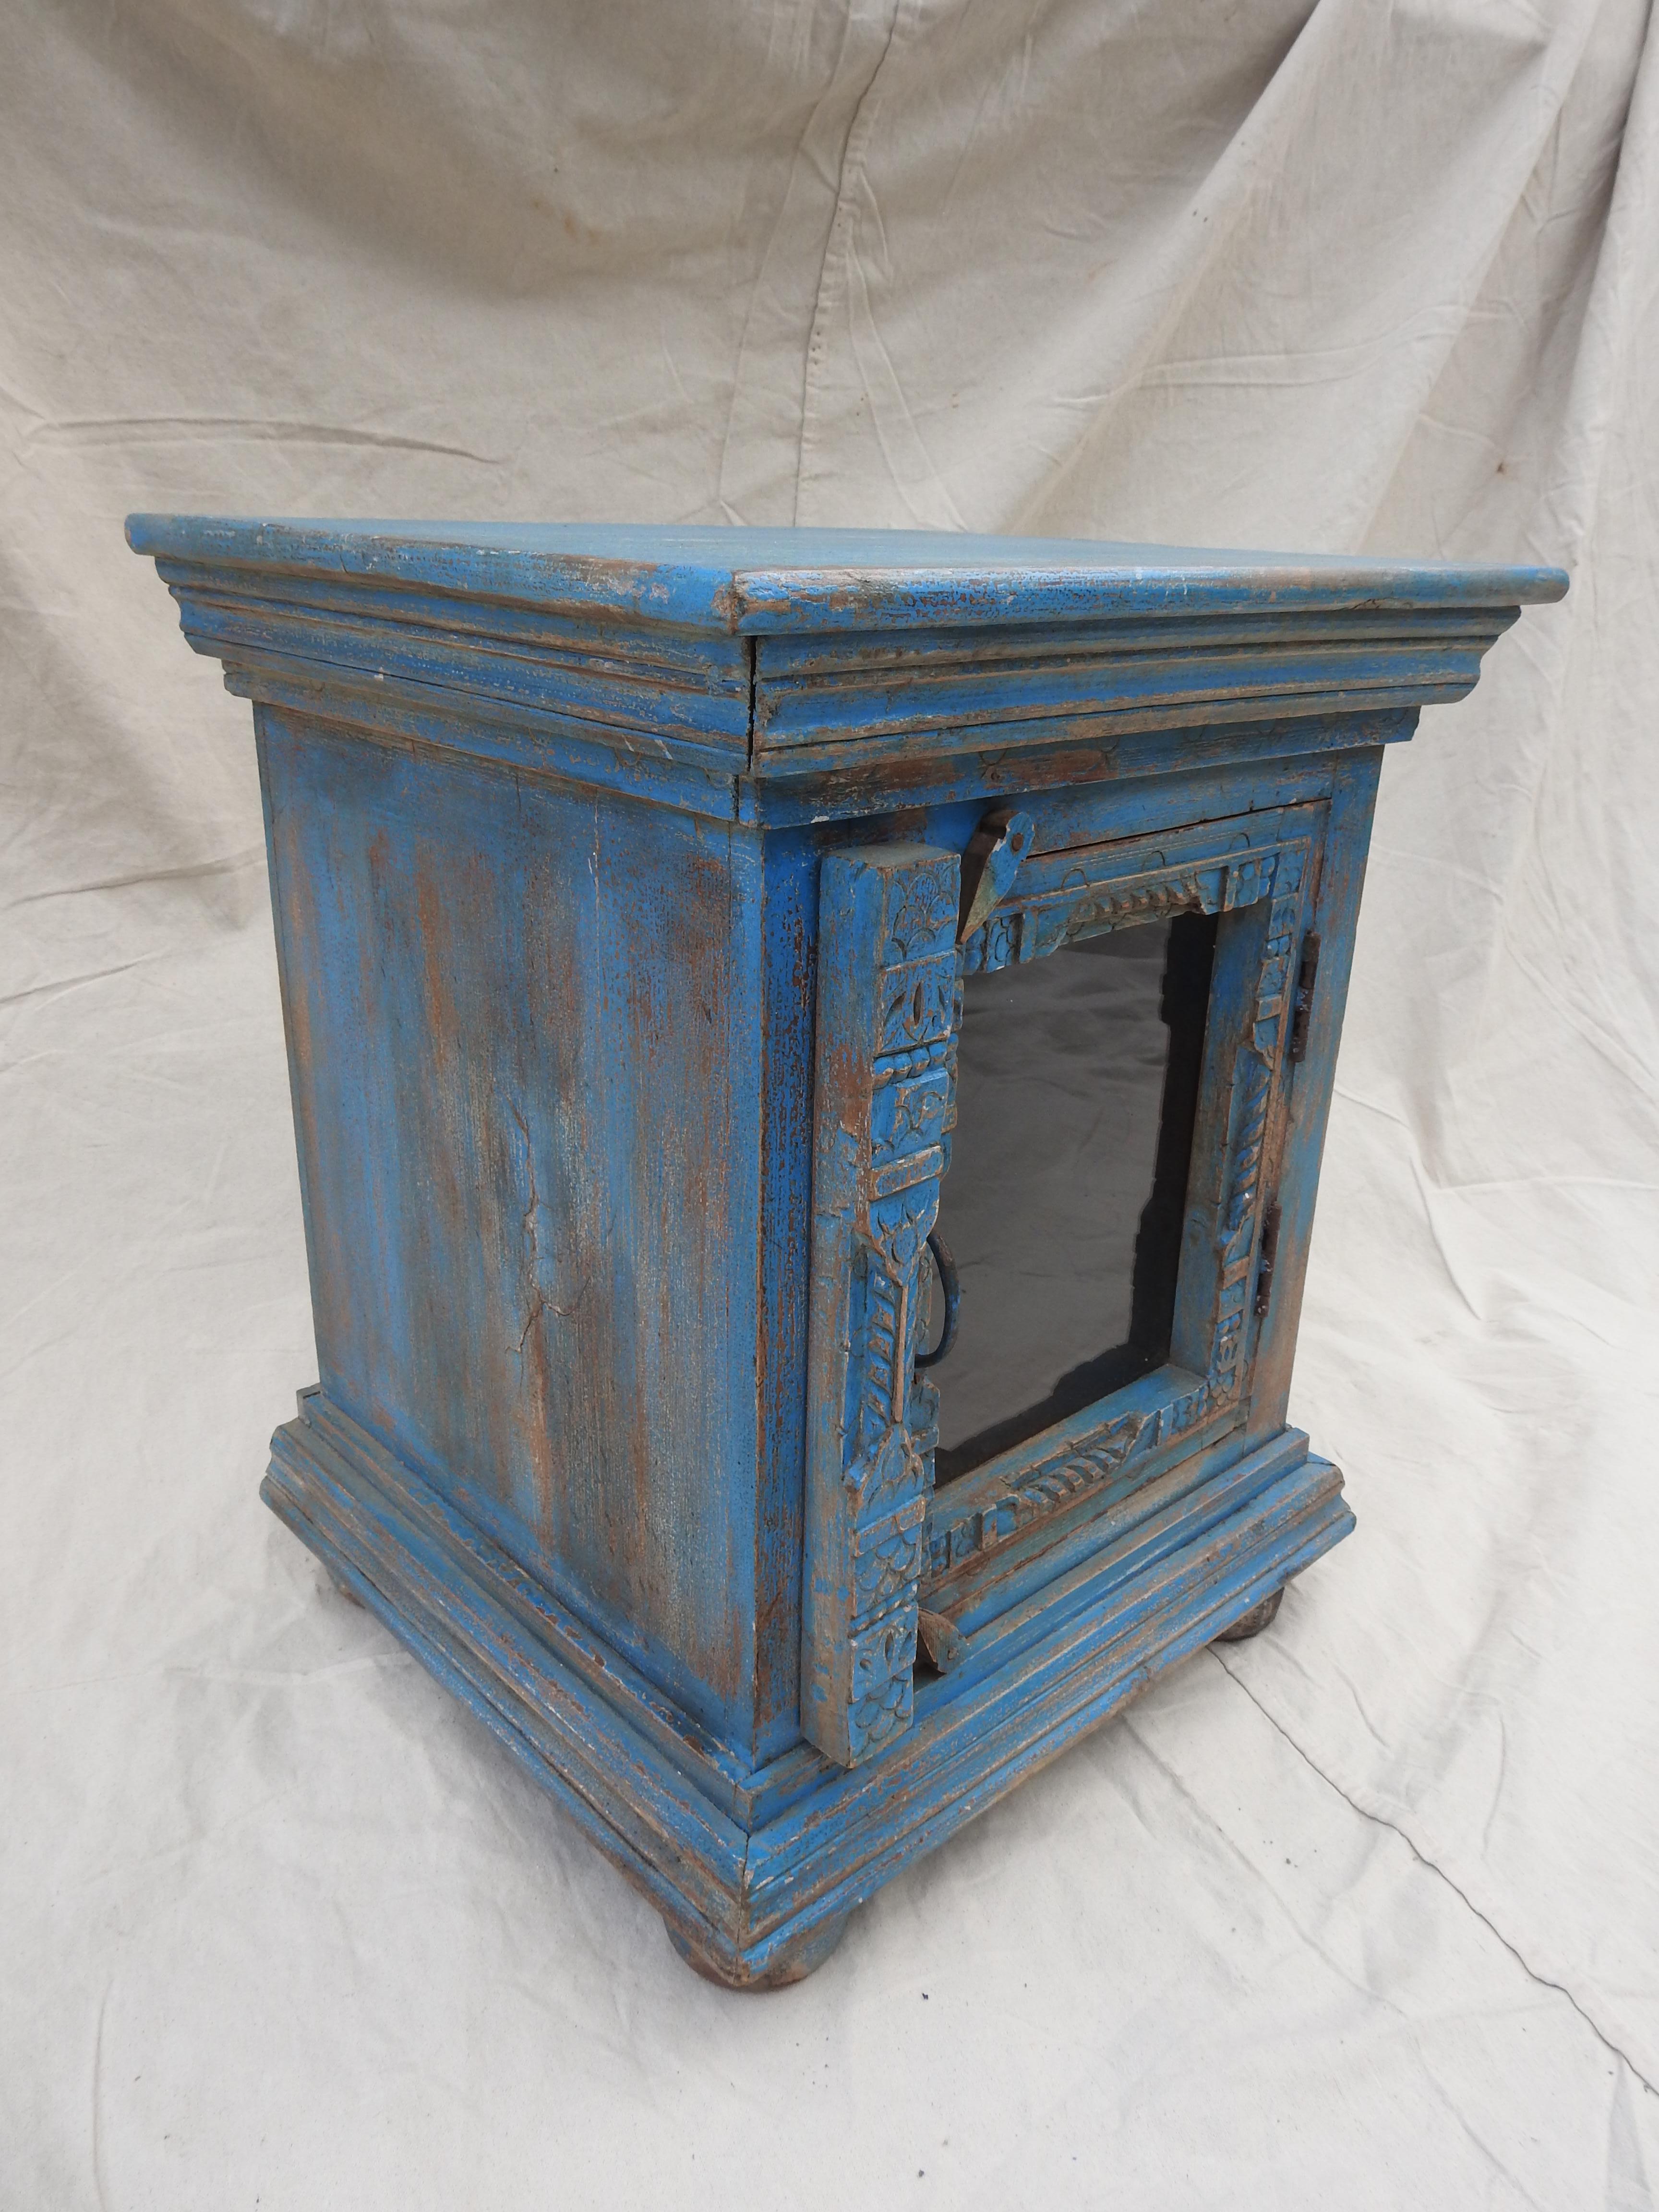 Hand painted turquoise table with glass door. Perfect for a side cabinet or end table. Having some relief carving to the door. Sits on 4 turned bun feet.